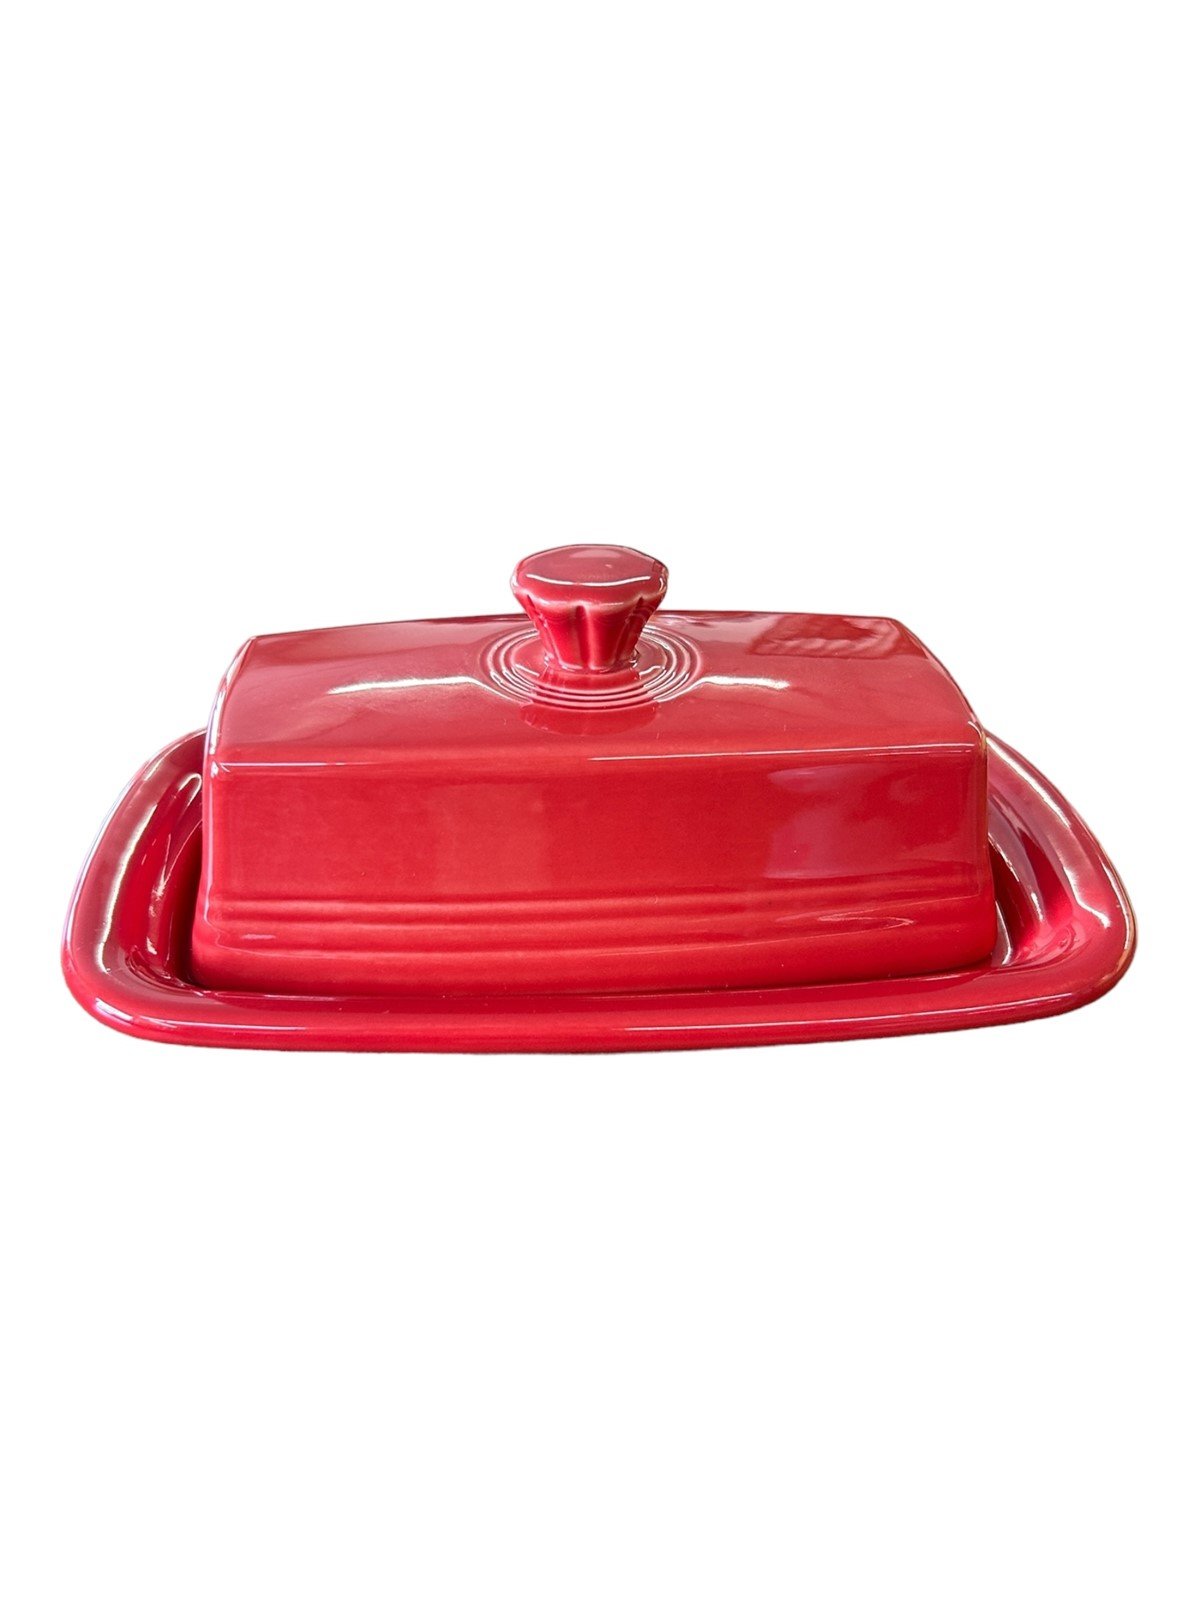 Fiesta - Scarlet Red XL Covered Butter Dish Homer Laughlin Ceramic Kitchenware